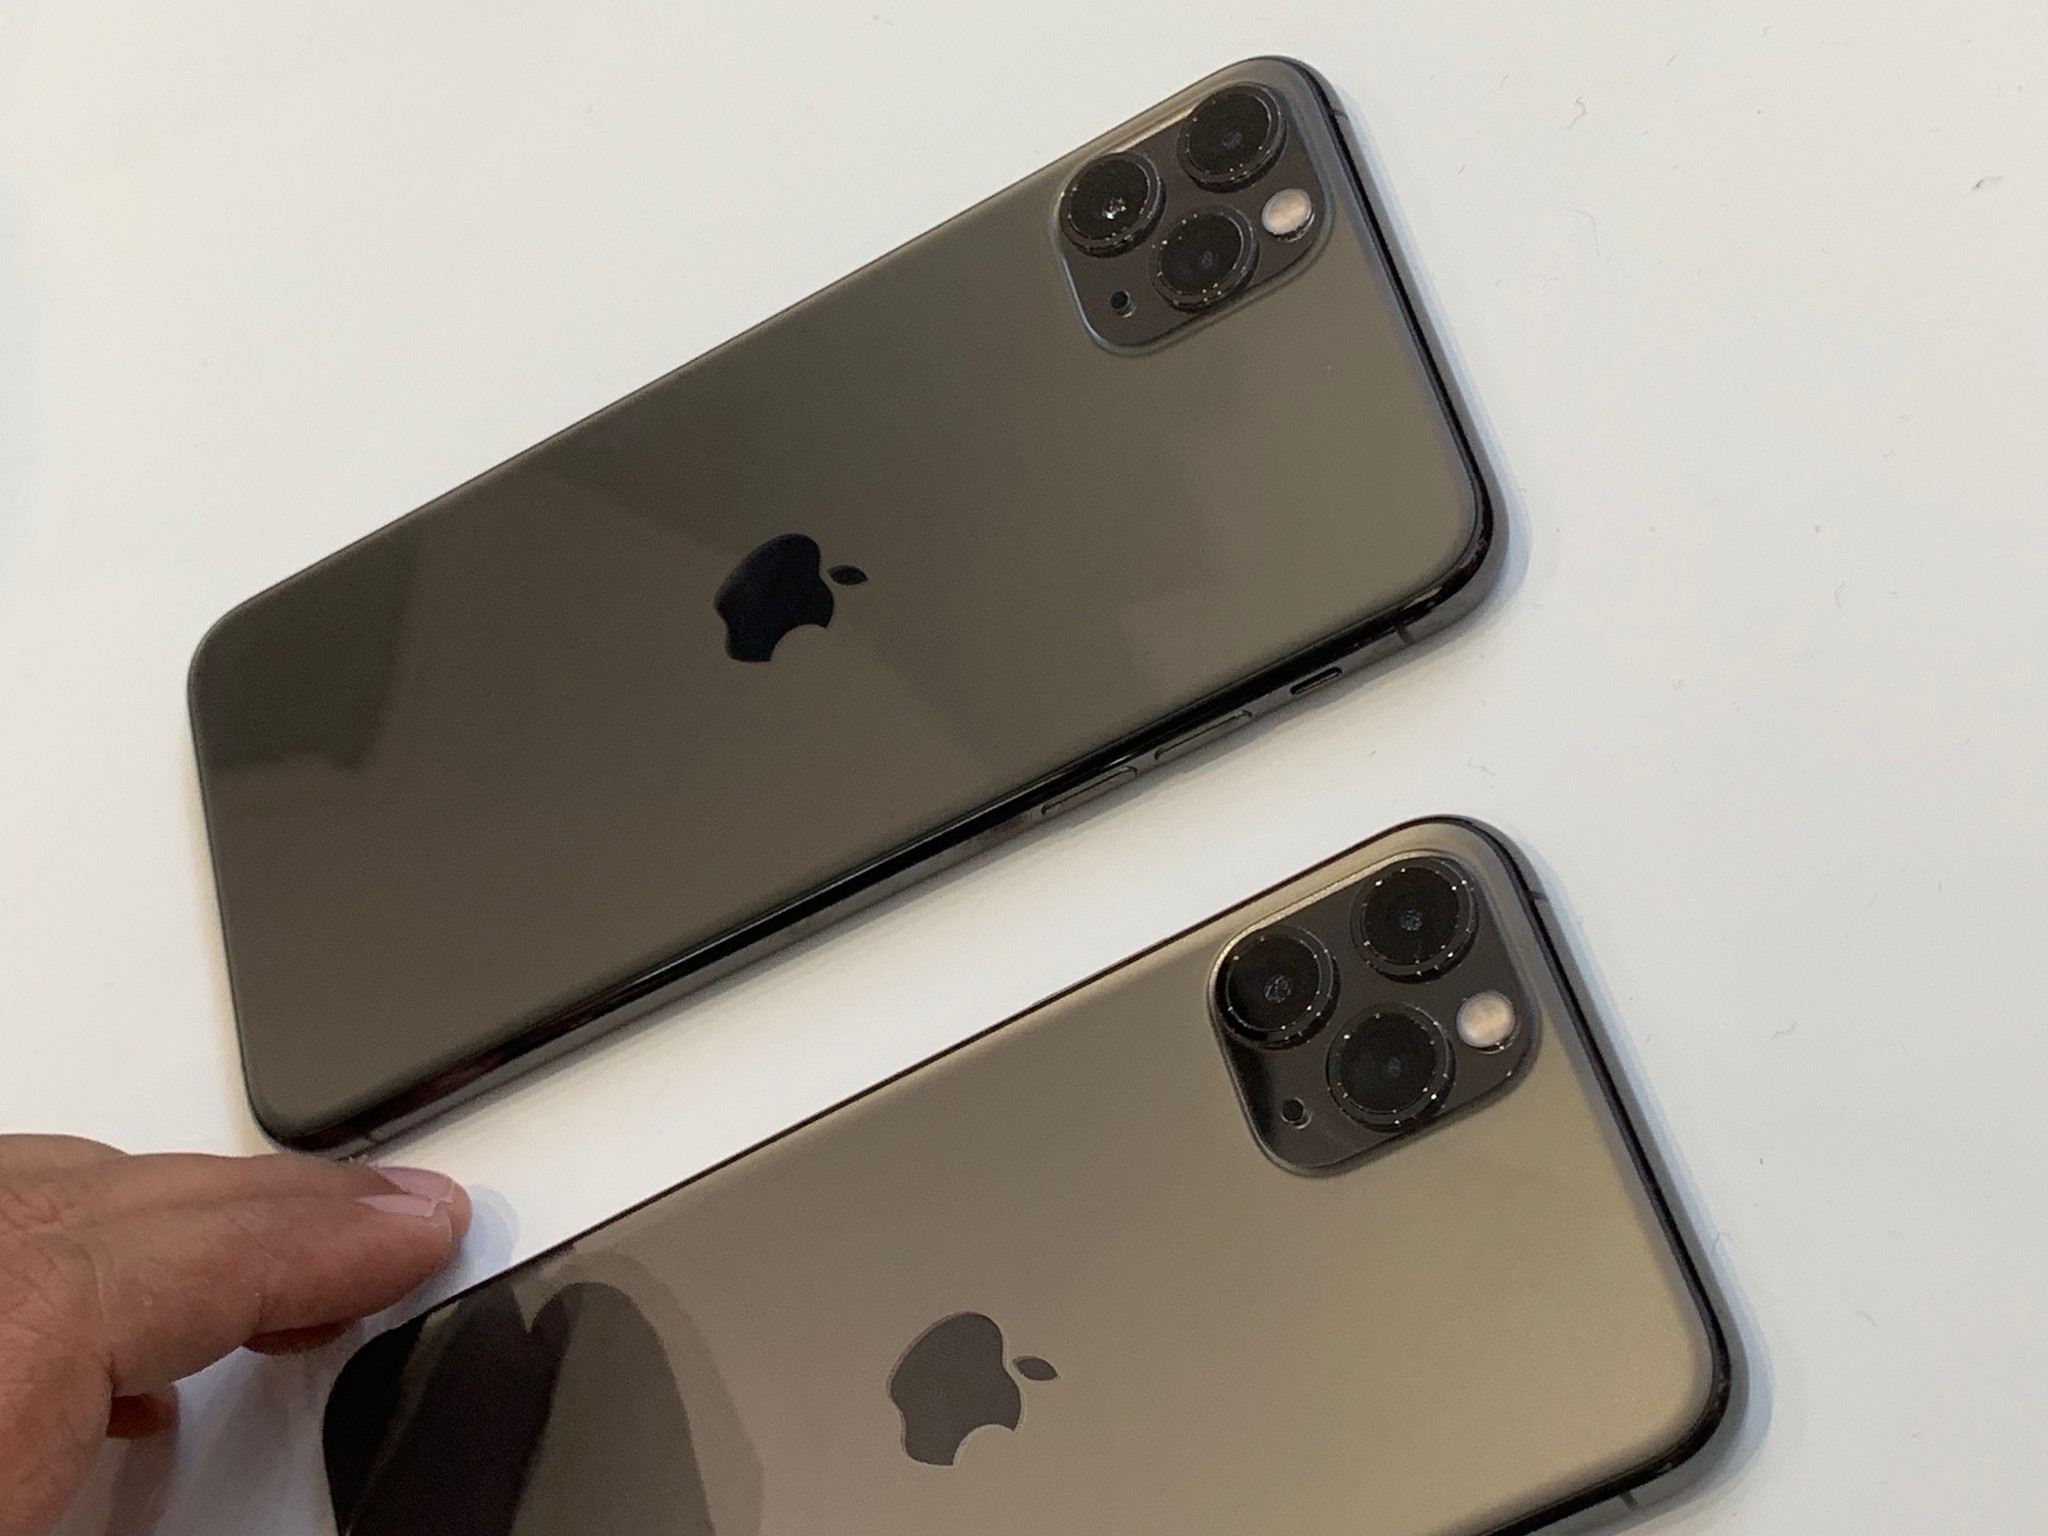 iPhone 11 Pro and iPhone 11 Pro Max side-by-side